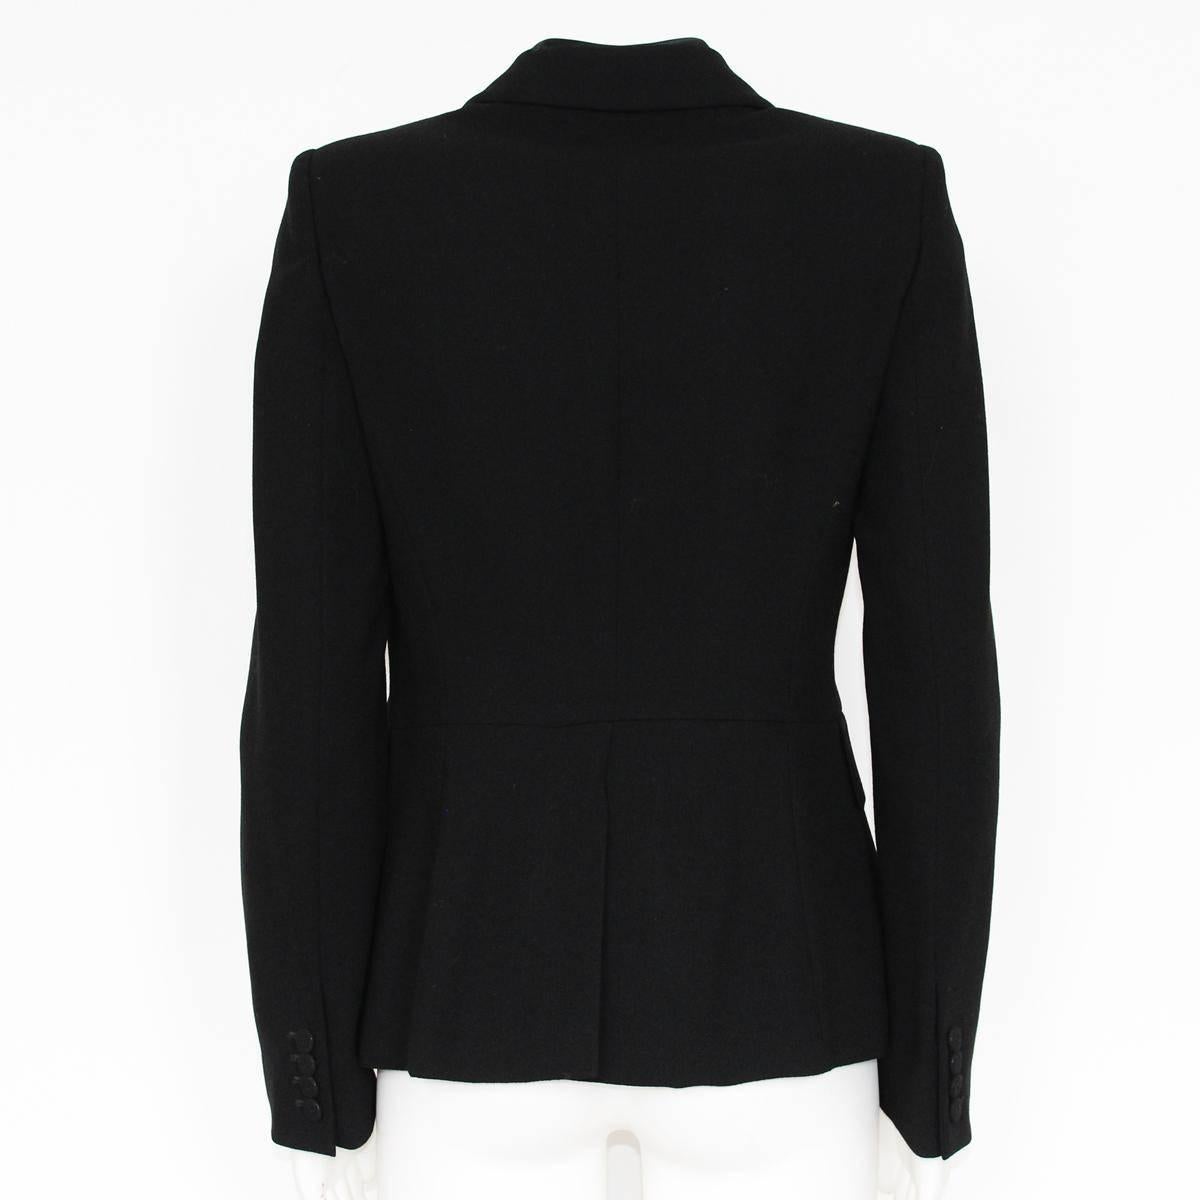 Beautiful and chic jacket by Alexander McQueen
Wool (90%) and cotton
Black color
Silk revers
Single buttons
Two pockets
Length from shoulder cm 58 (22.8 inches)
Worldwide express shipping included in the price !